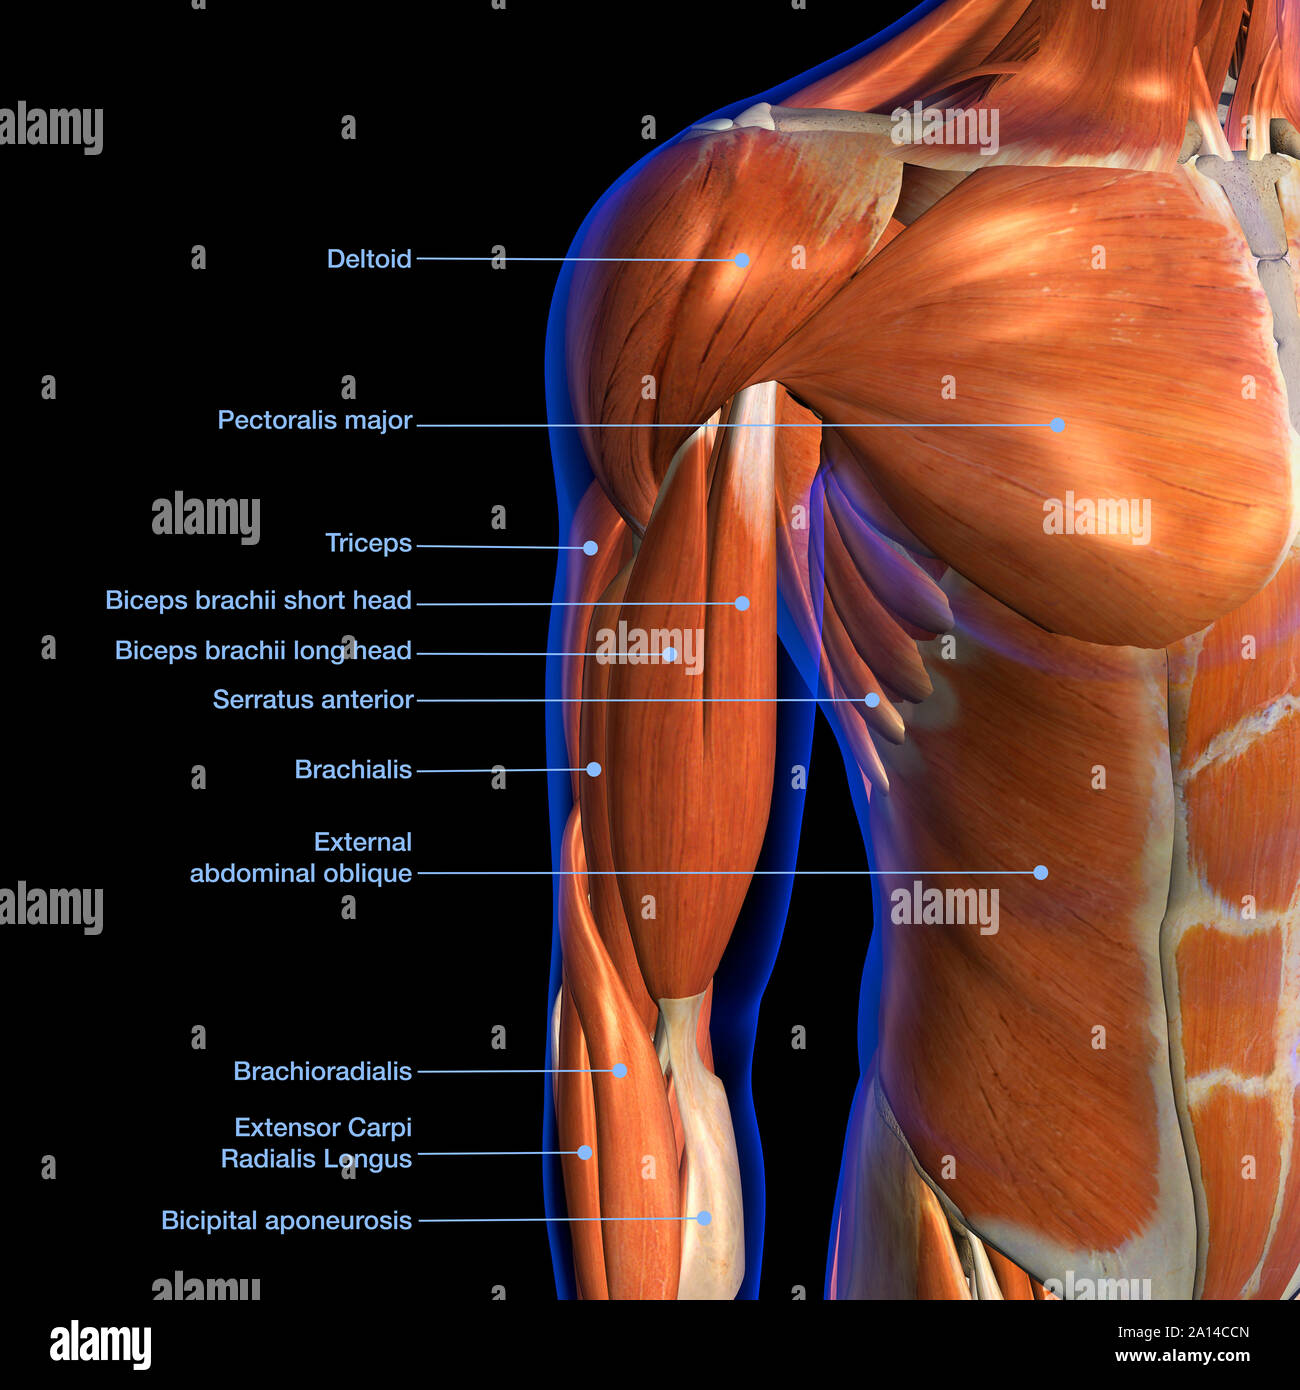 Labeled Anatomy Chart Of Male Biceps And Chest Muscle On Black Background Stock Photo Alamy